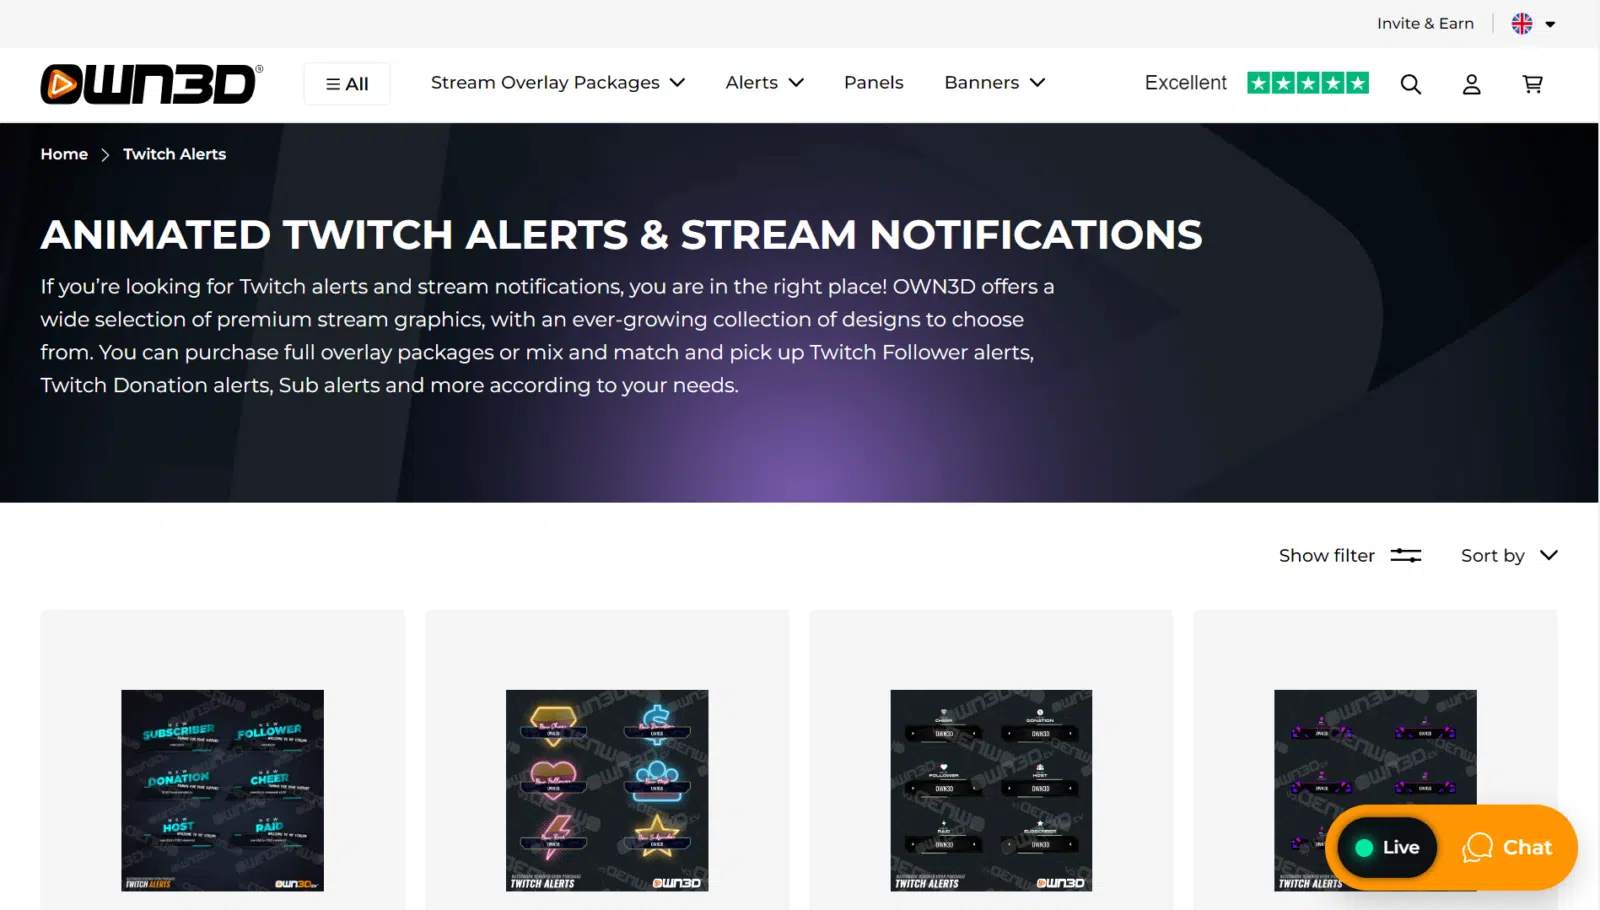 Own3d Twitch Alerts Page